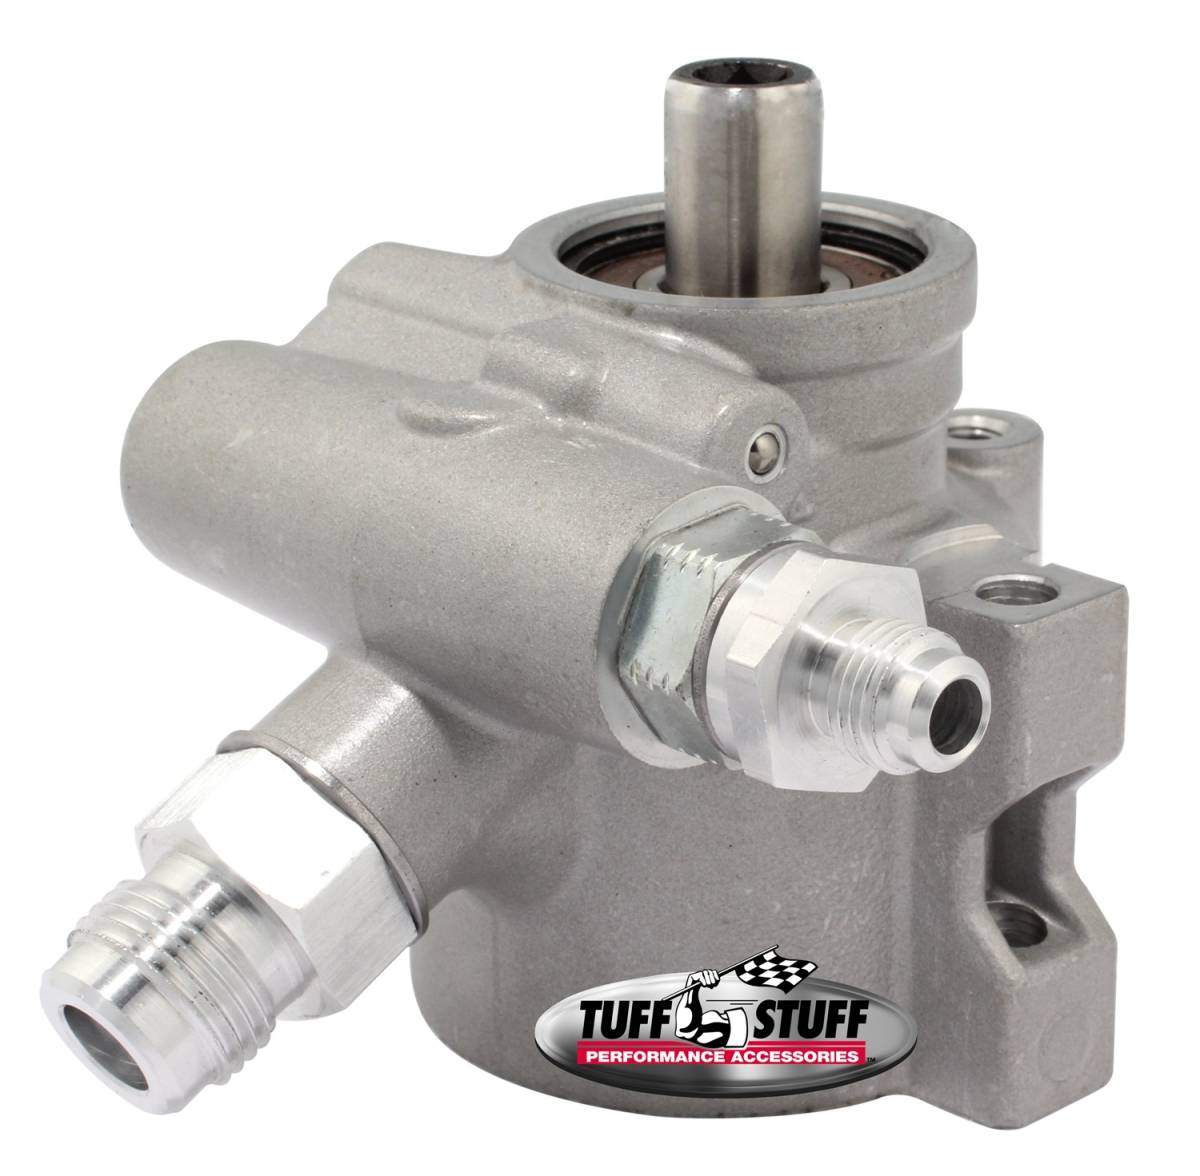 Tuff Stuff Performance - Type II Alum. Power Steering Pump AN-6 And AN-10 Fitting 8mm Through Hole Mounting Aluminum For Street Rods/Custom Vehicles w/Limited Engine Space Factory Cast PLUS+ 6175AL